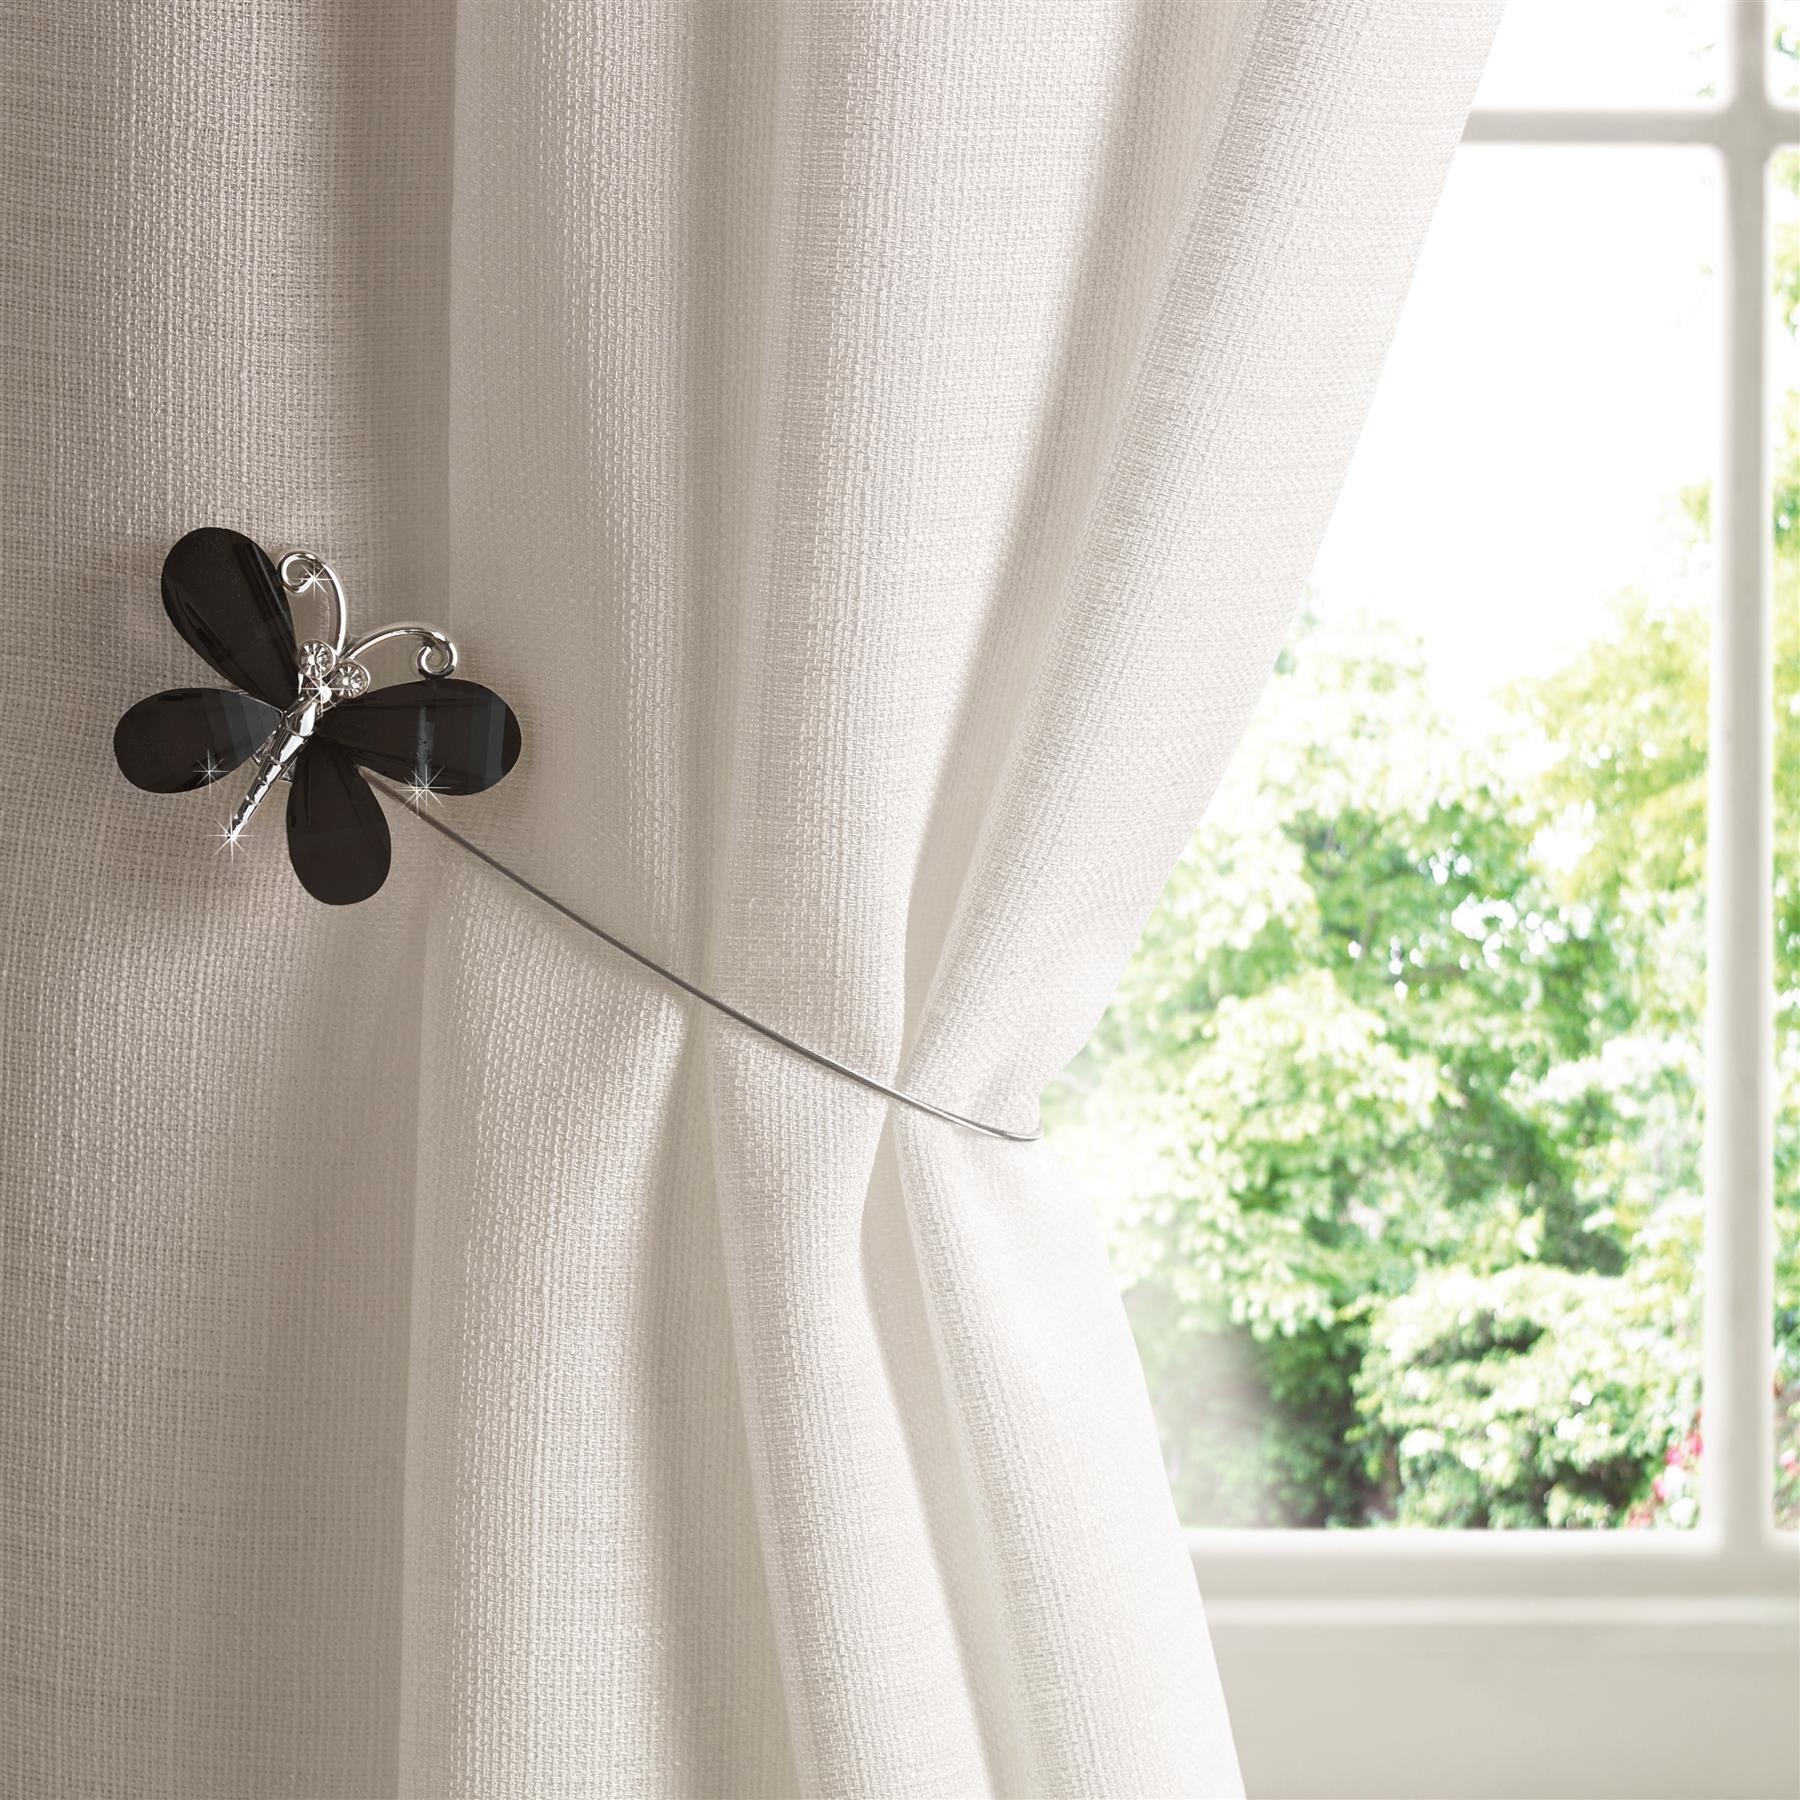 Black Butterfly Magnetic Curtain Tie Backs